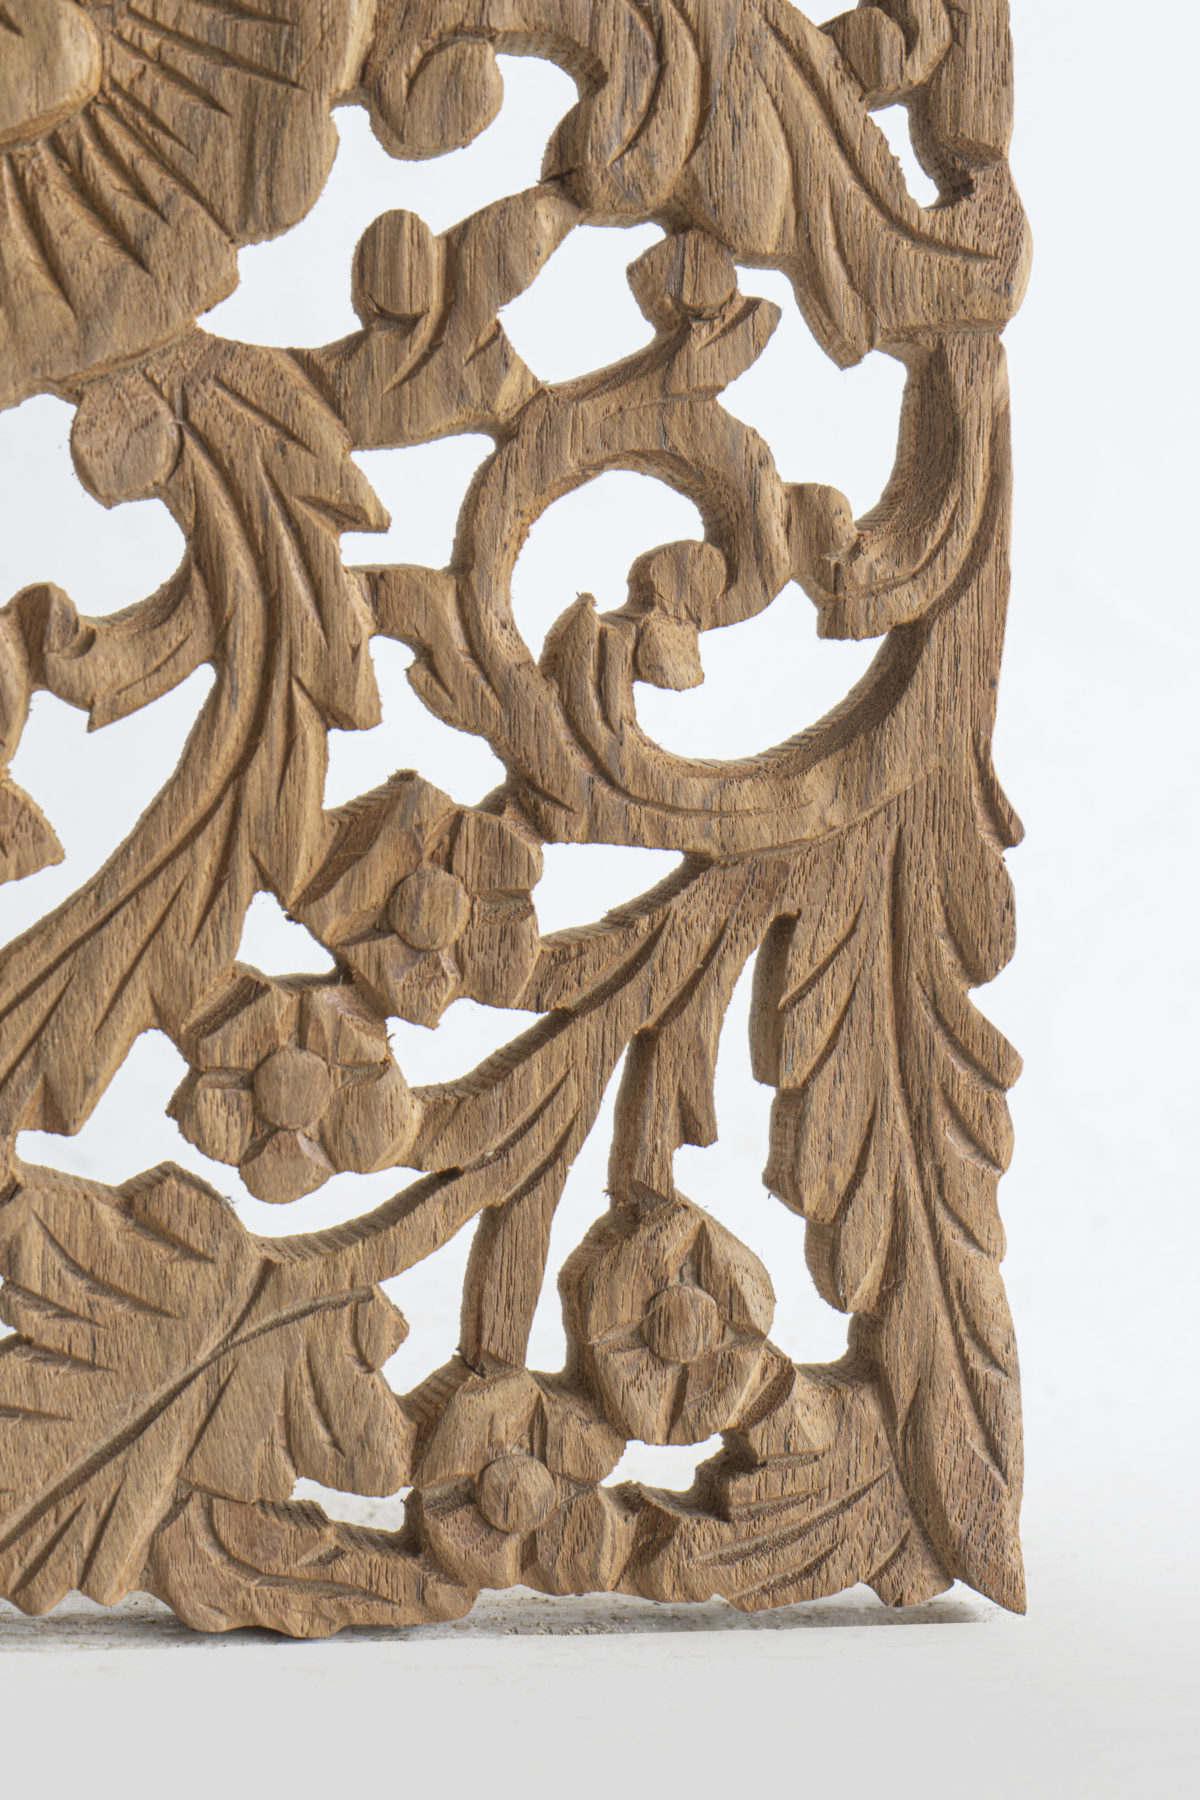 Eco friendly wood carving